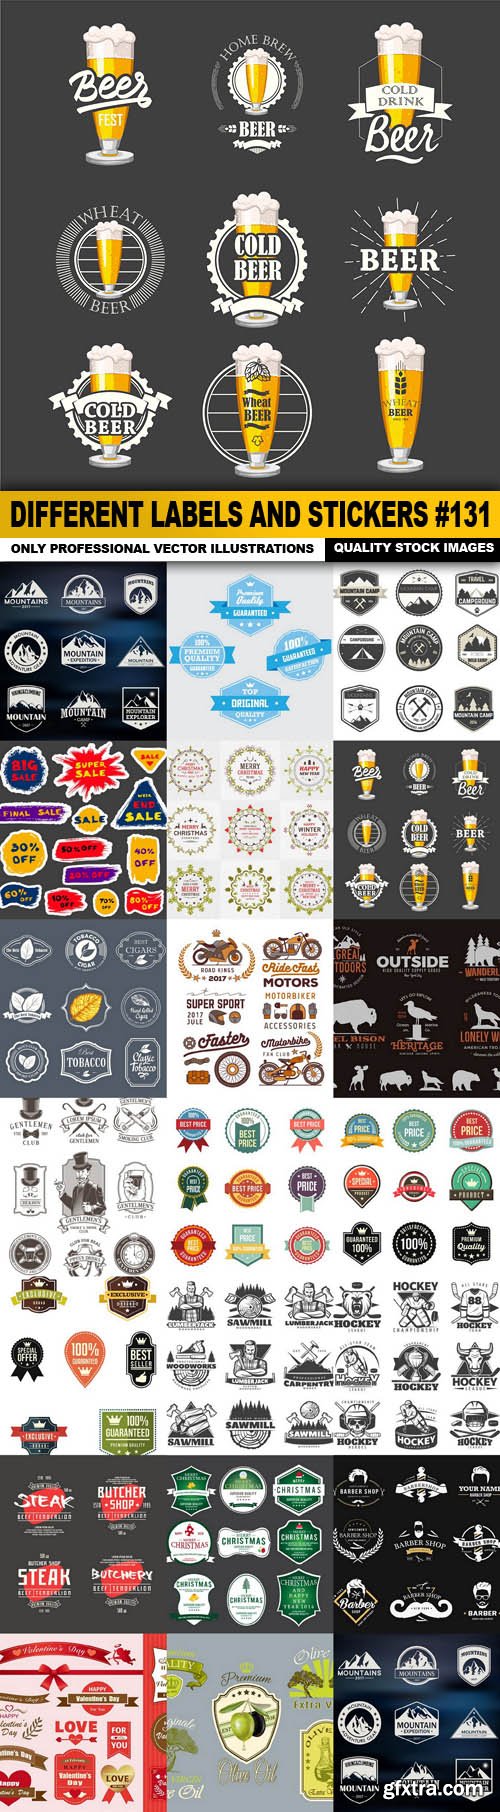 Different Labels And Stickers #131 - 20 Vector